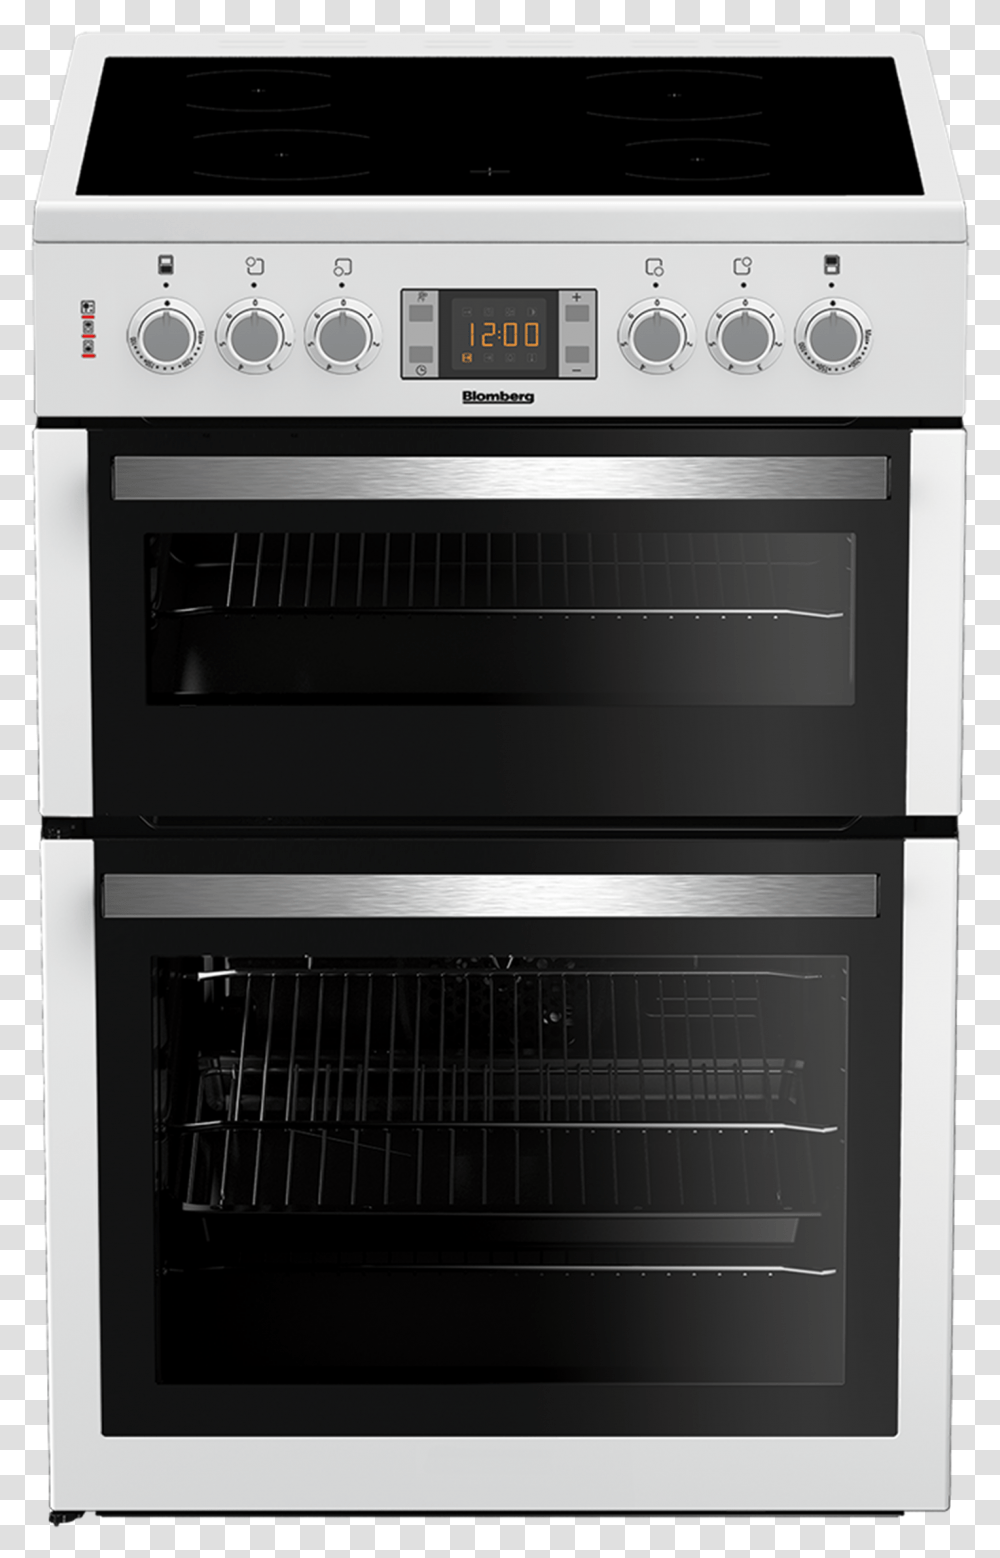 Stove, Oven, Appliance, Microwave, Cooker Transparent Png